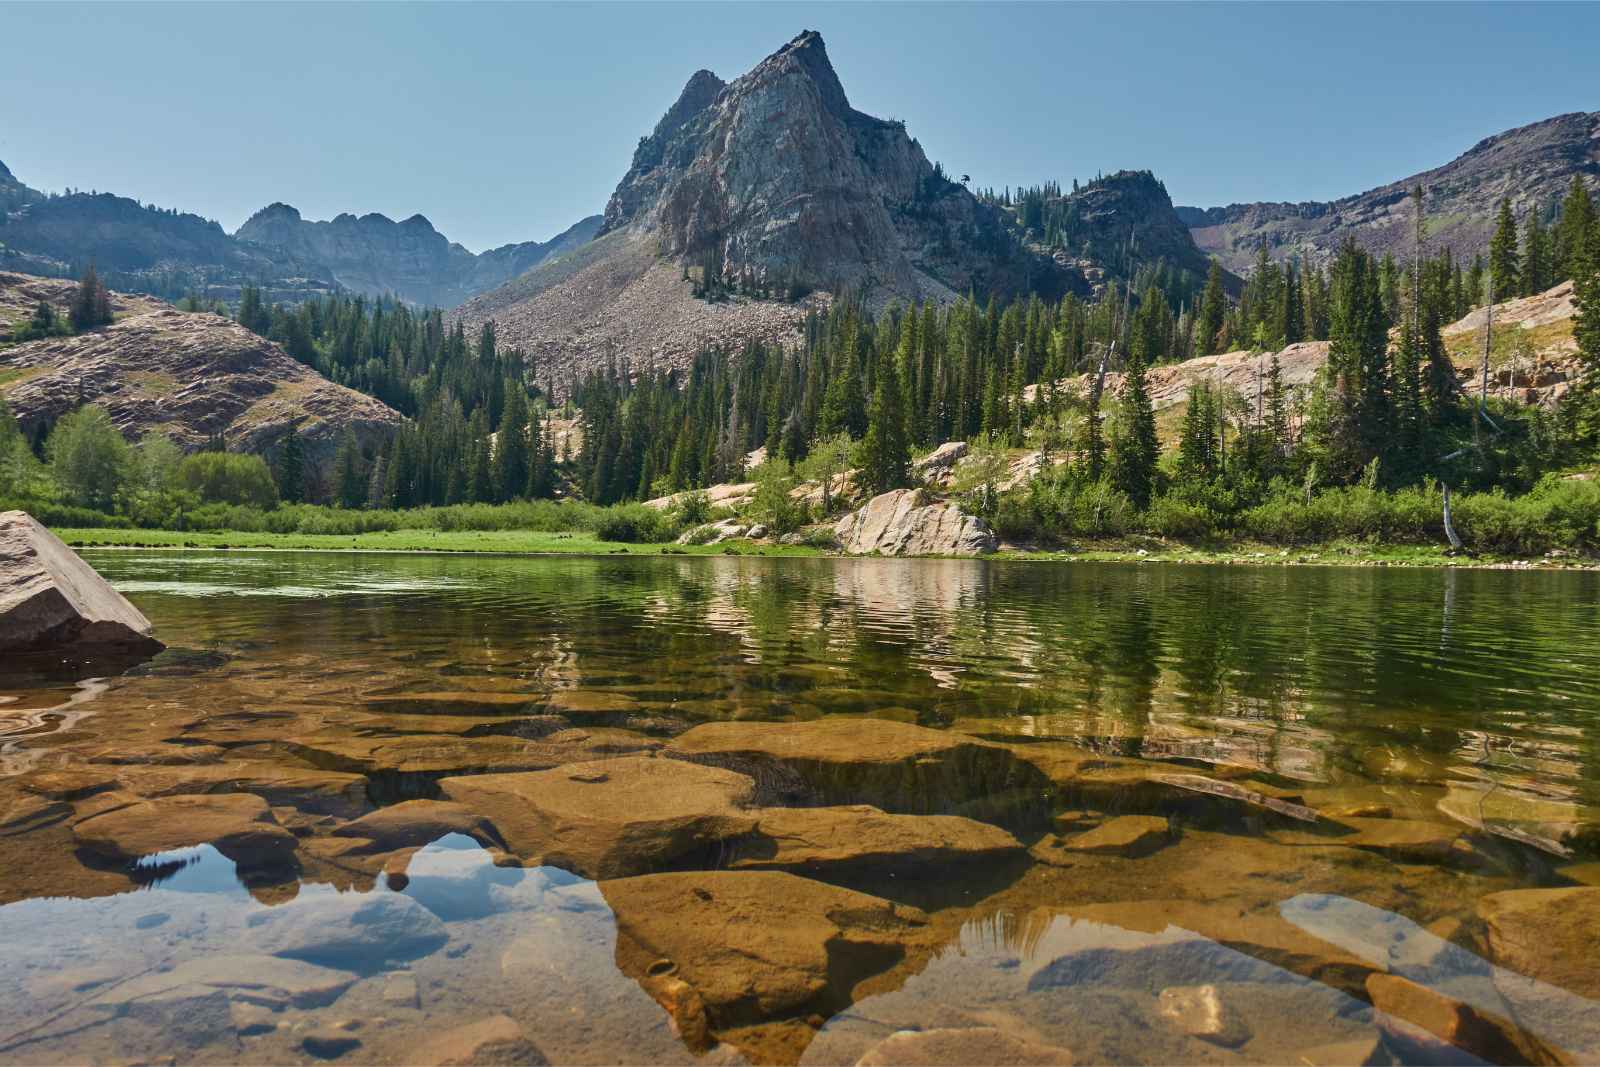 Things to do in Salt Lake City - Lake Blanche